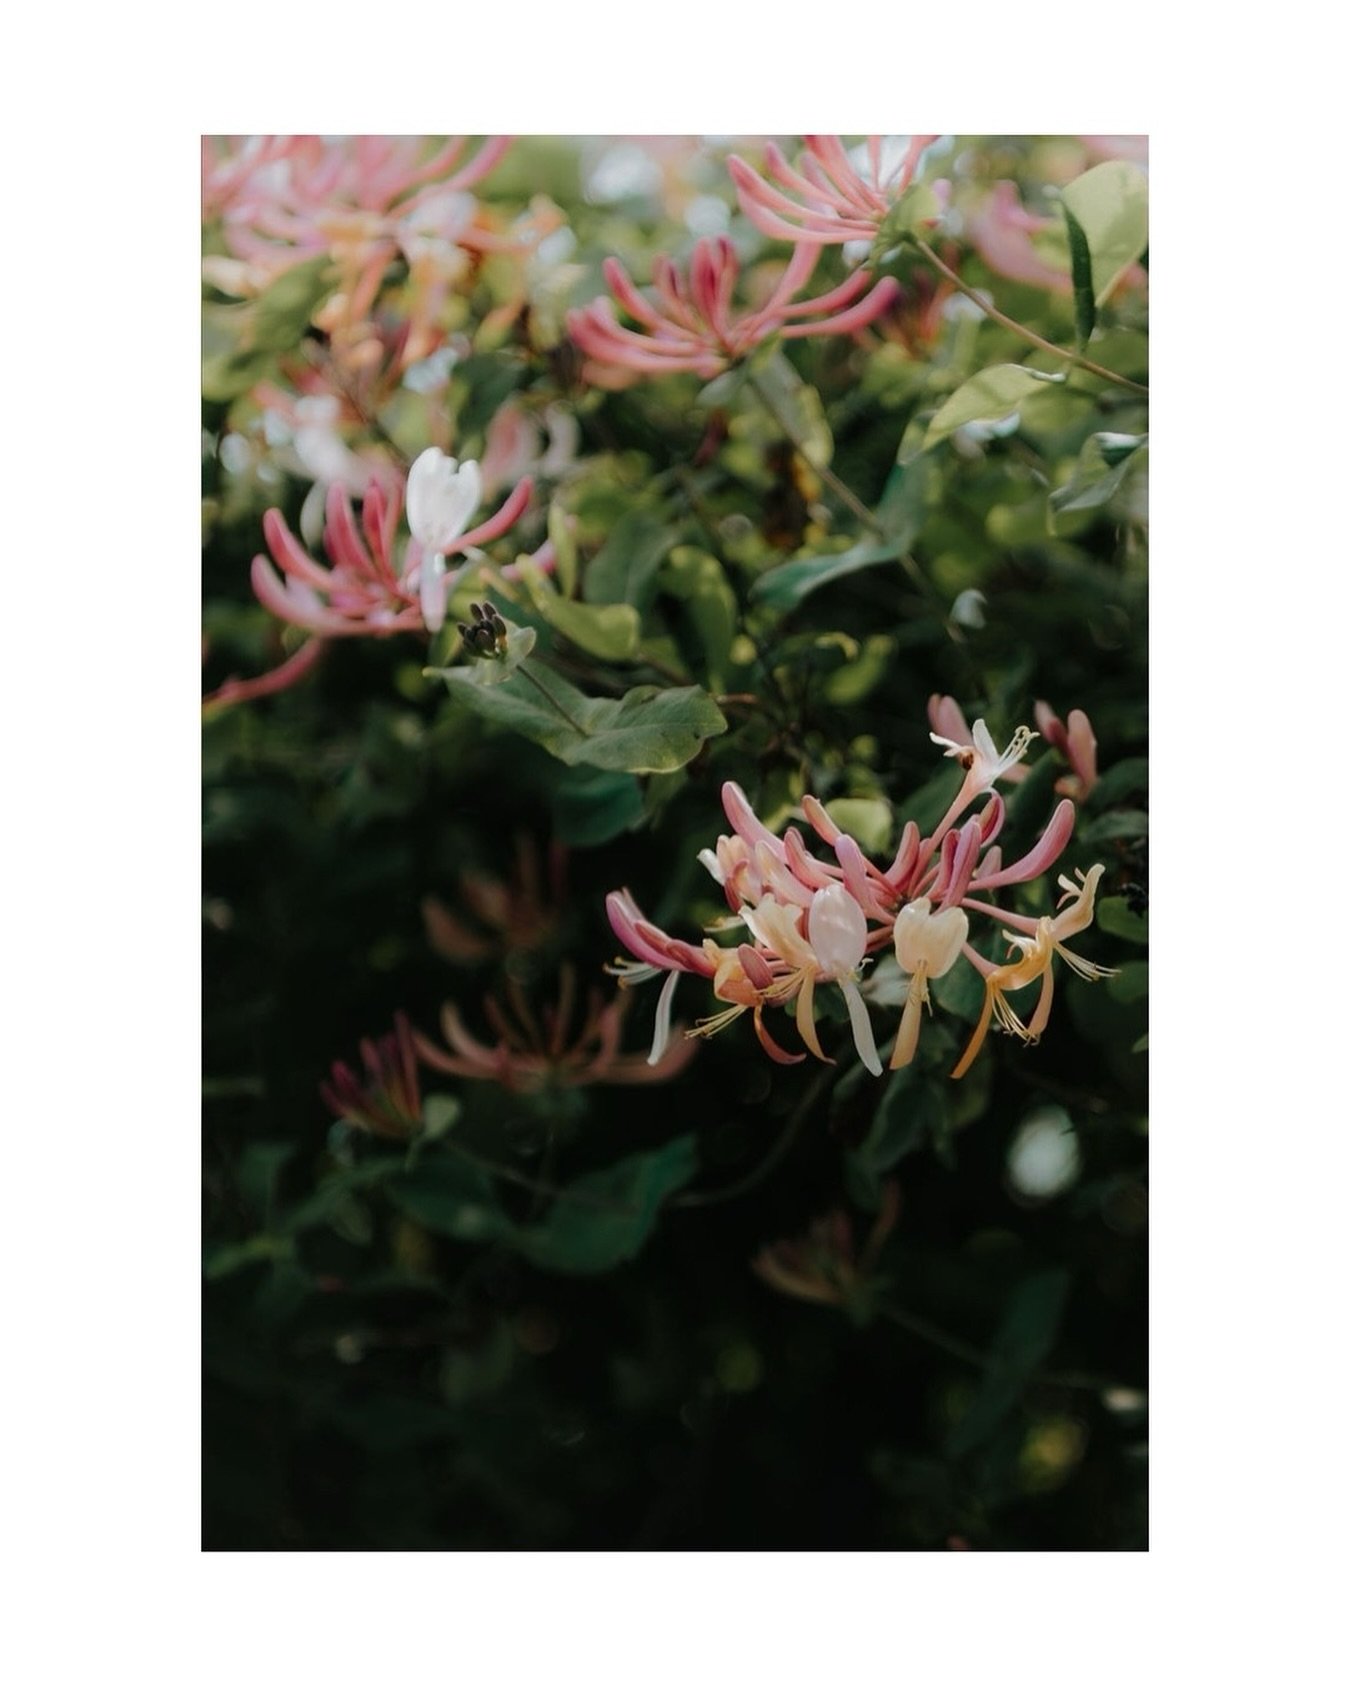 Beautiful honeysuckle&hellip; reminds me of my Granny.

#honeysuckle #springflowers #wildflorography #countrylife #countryliving